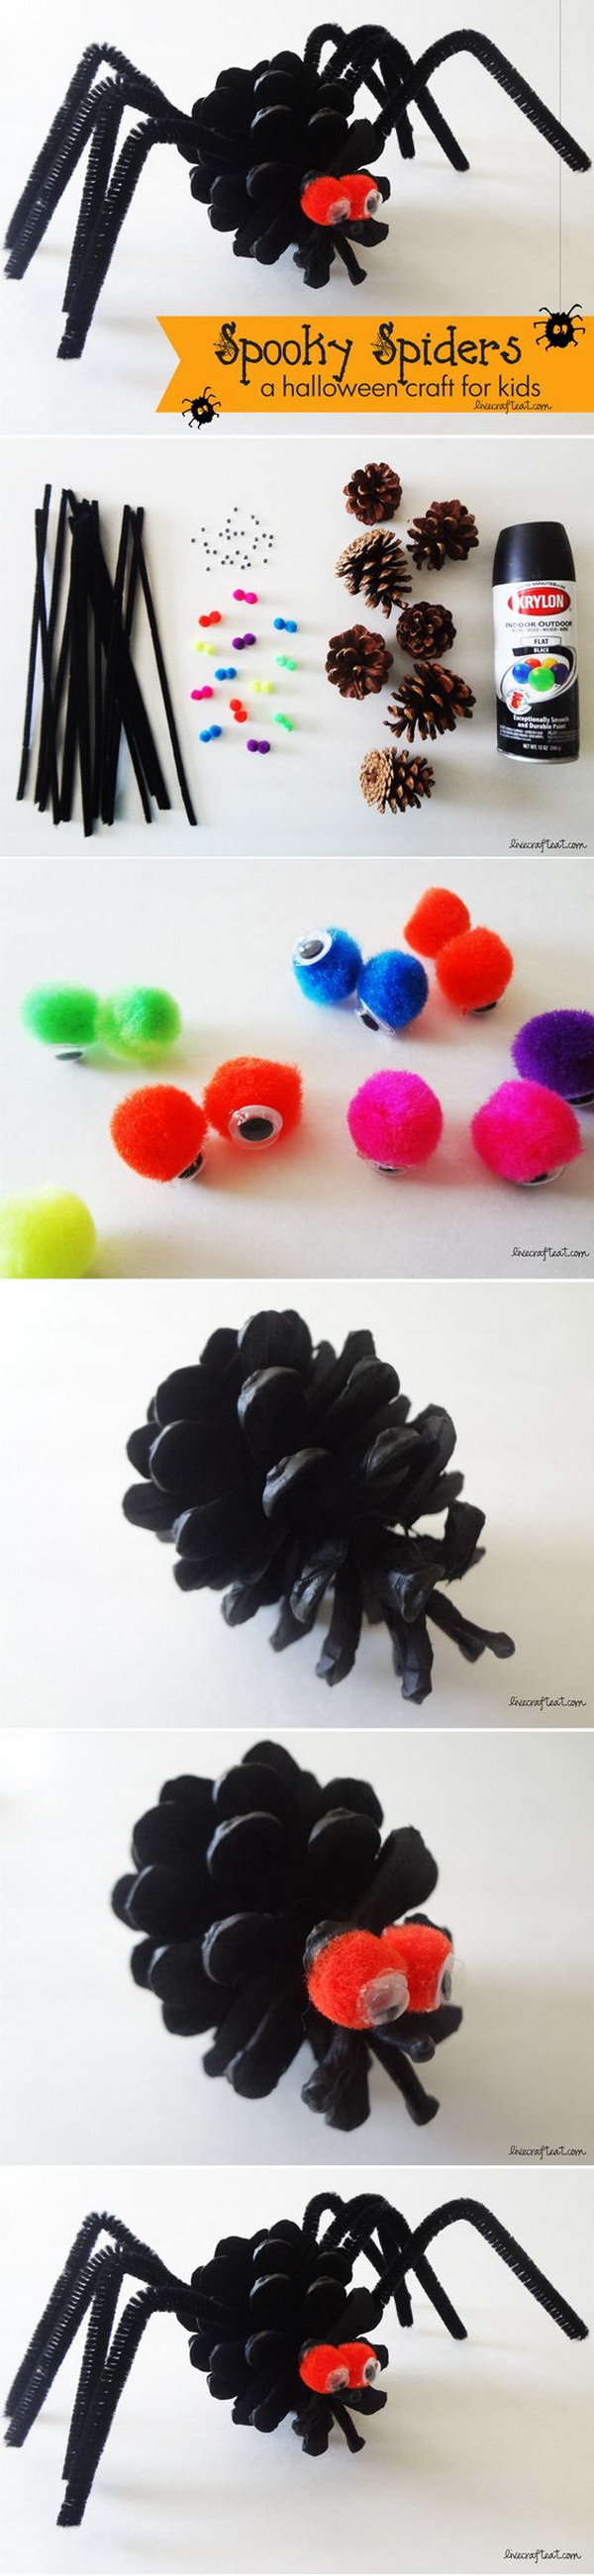 Spooky Spiders Made with Pine Cone. Make these super easy spooky spiders with pine cones! It is really a fun Halloween craft for kids.